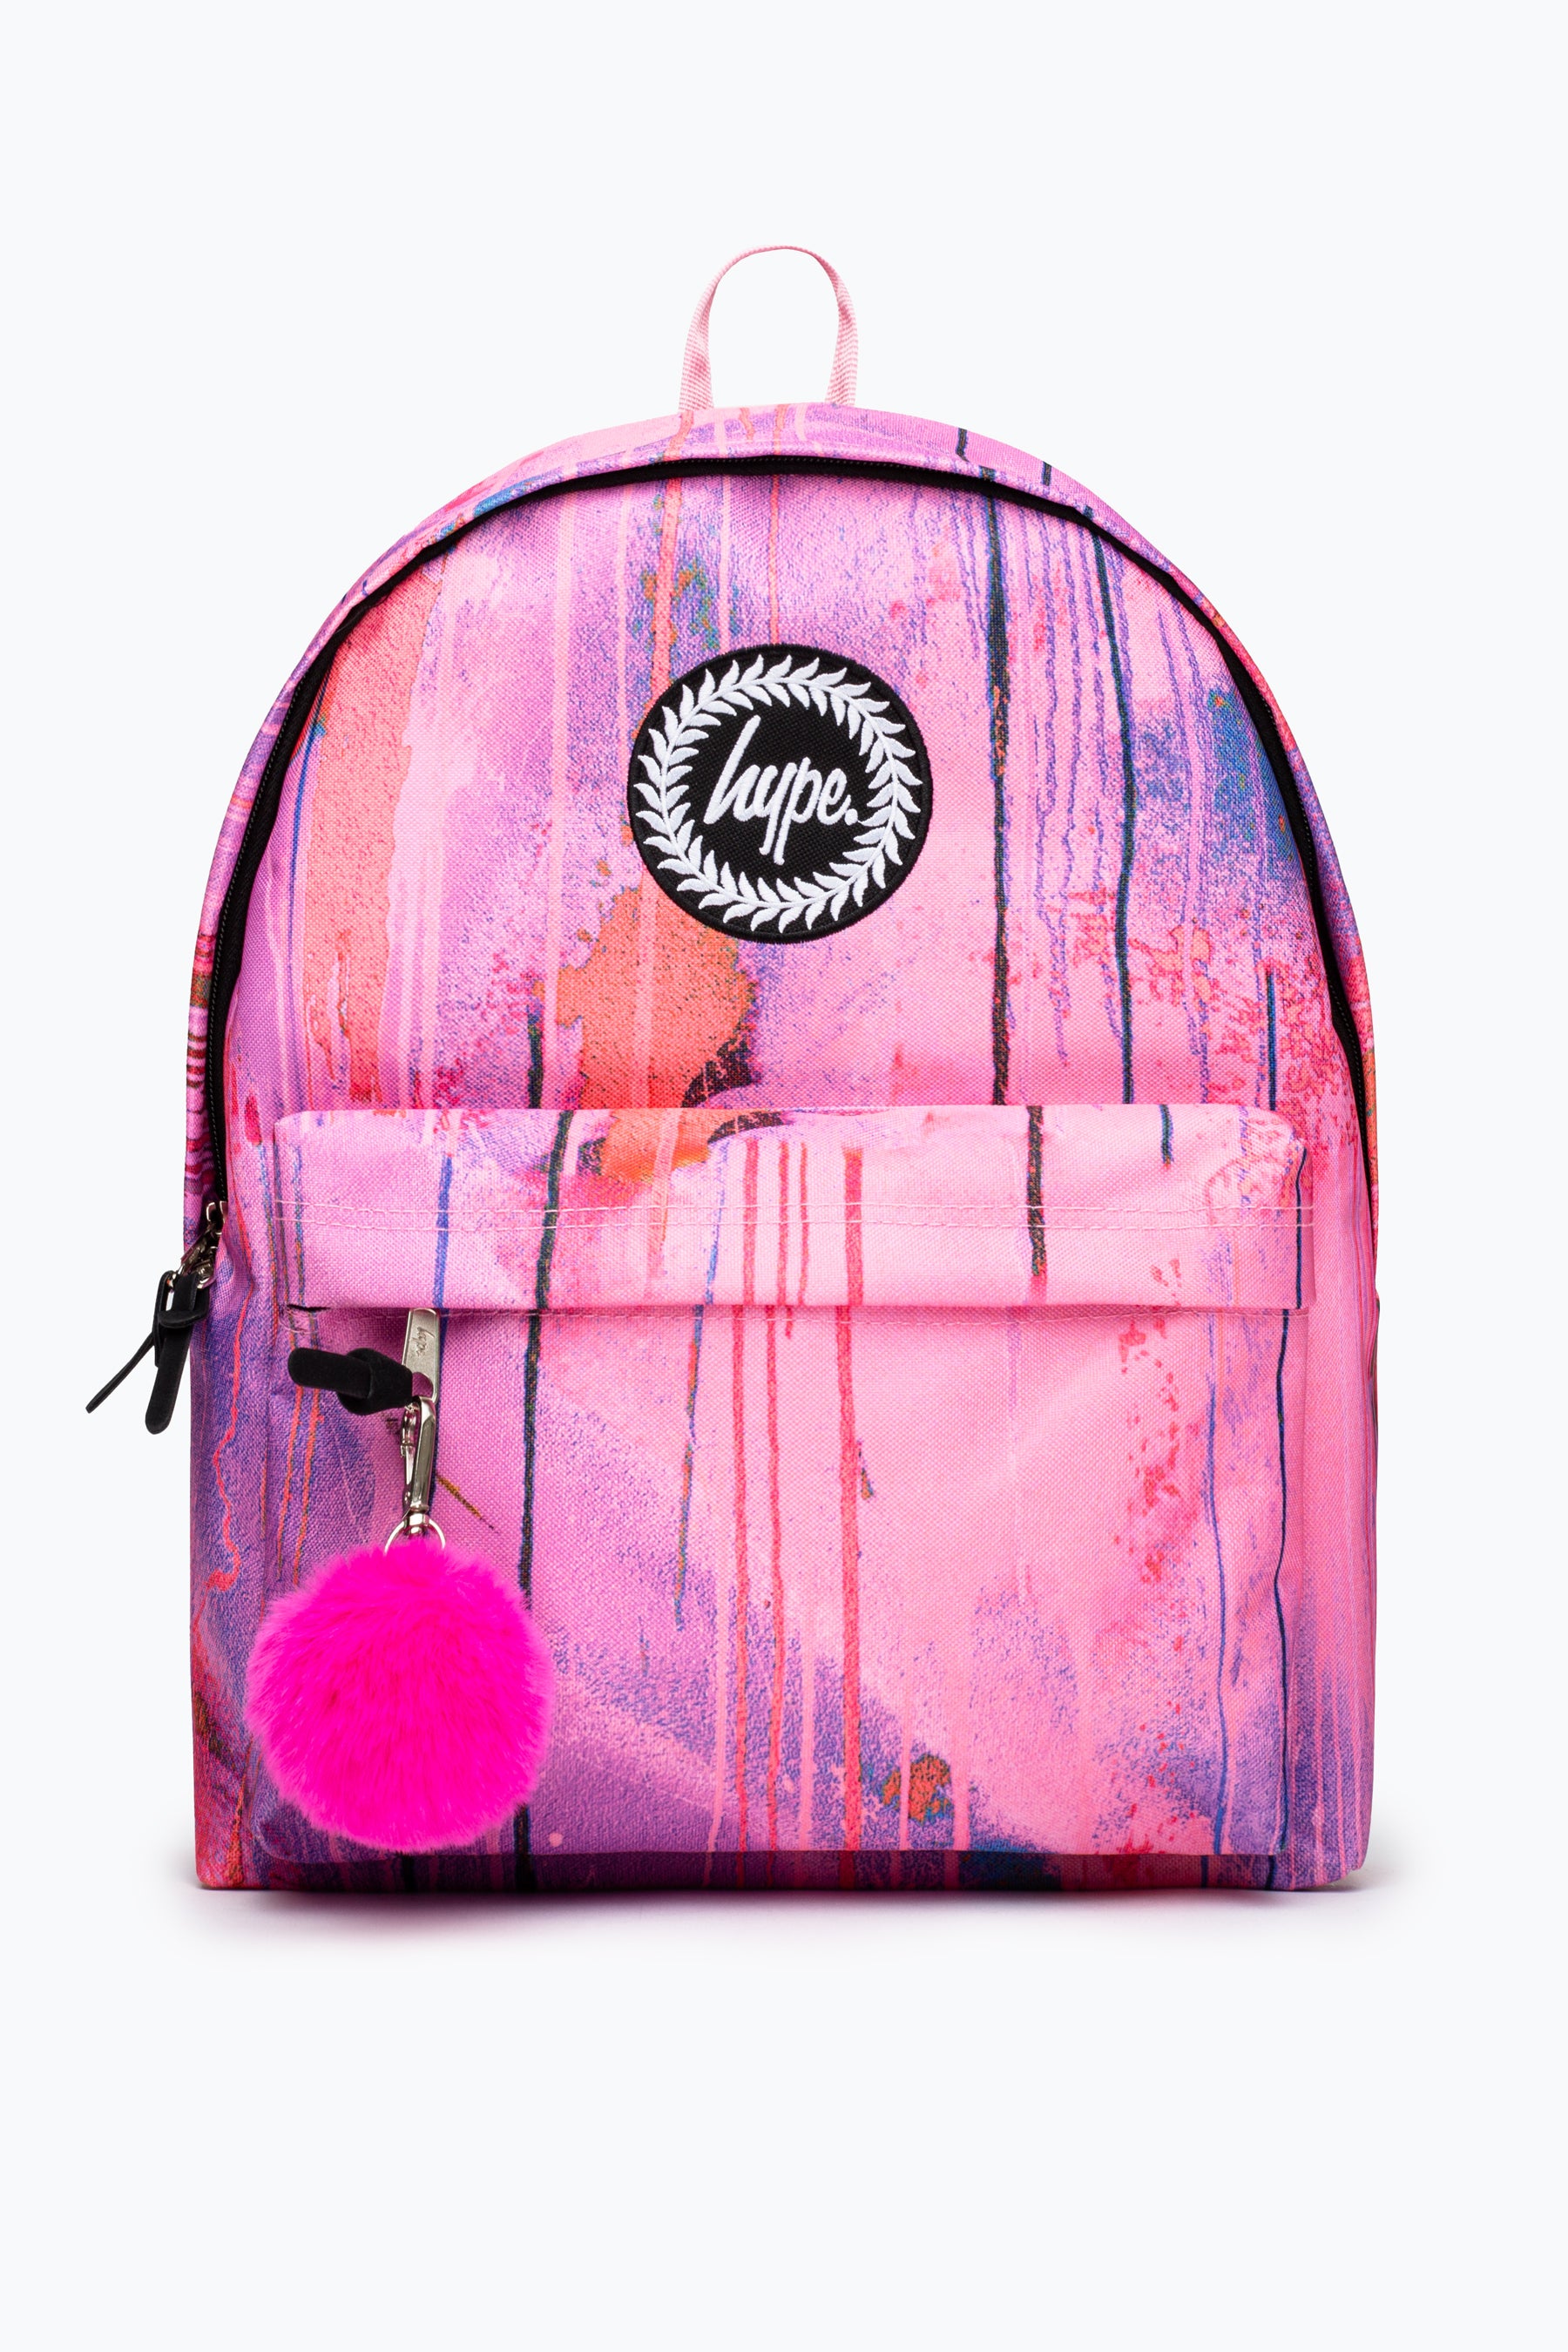 HYPE PINK SPRAY BACKPACK | Hype.